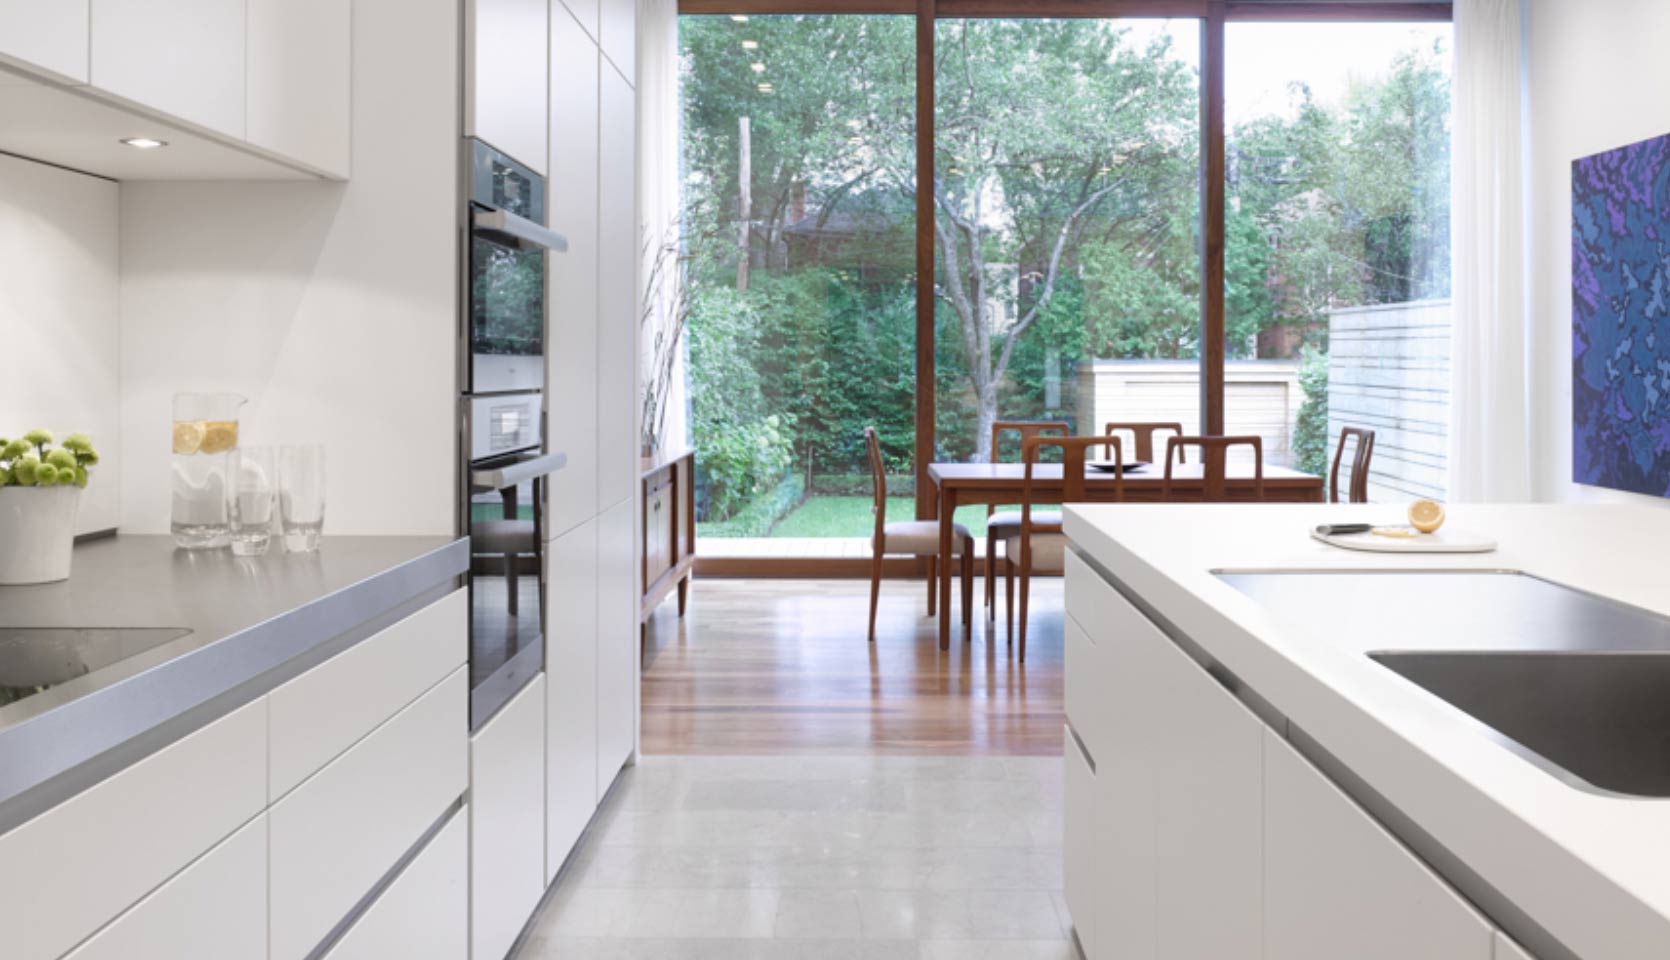 View of Kitchen and Dining Area with White Flat Panel Cabinets and Large Floor to Ceiling Windows